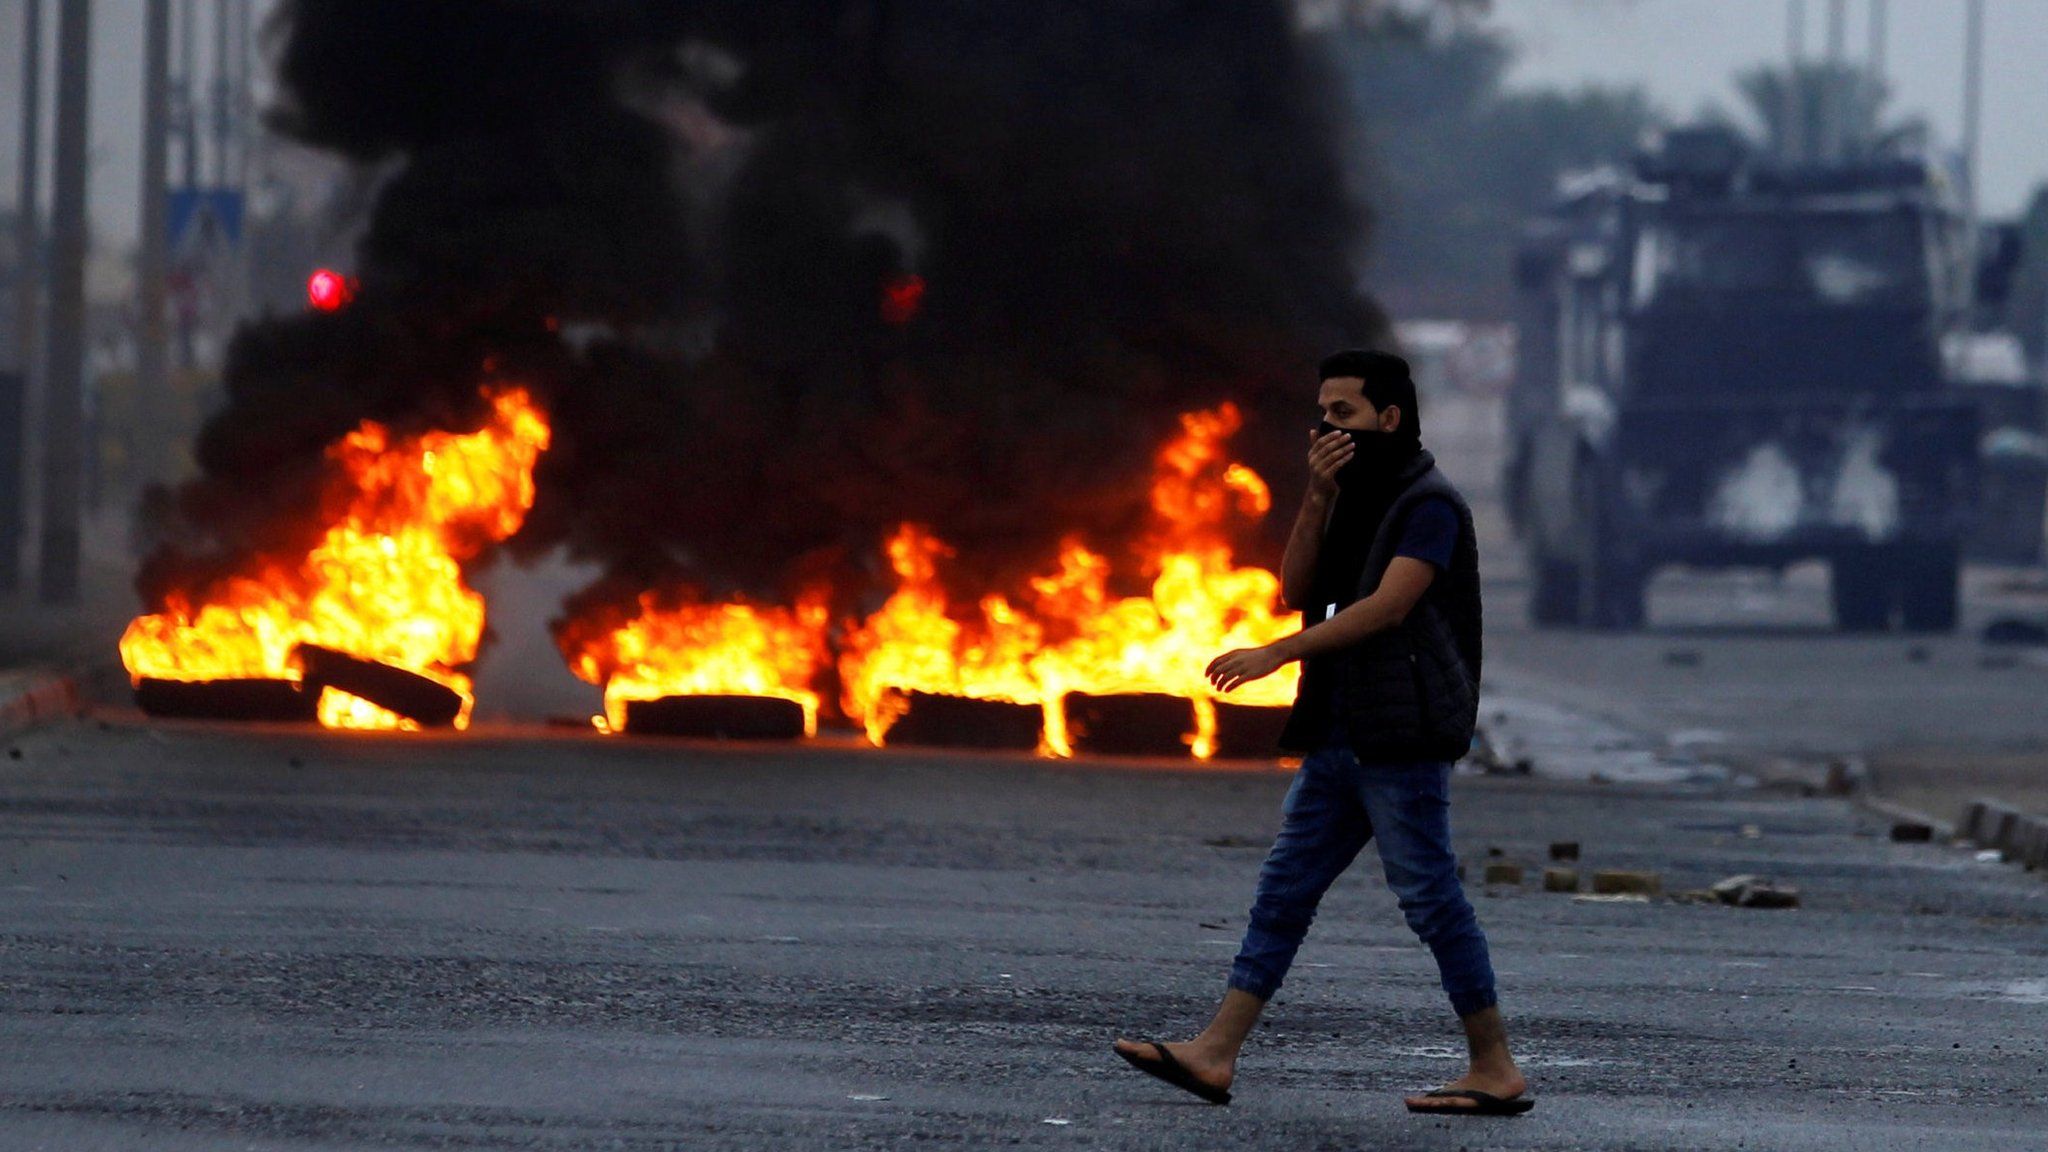 Anti-government protesters burn tyres and block a road during a protest to mark the 6th anniversary of the 14 February uprising in Bahrain, in the village of Sitra, south of Manama (14 February 2017)